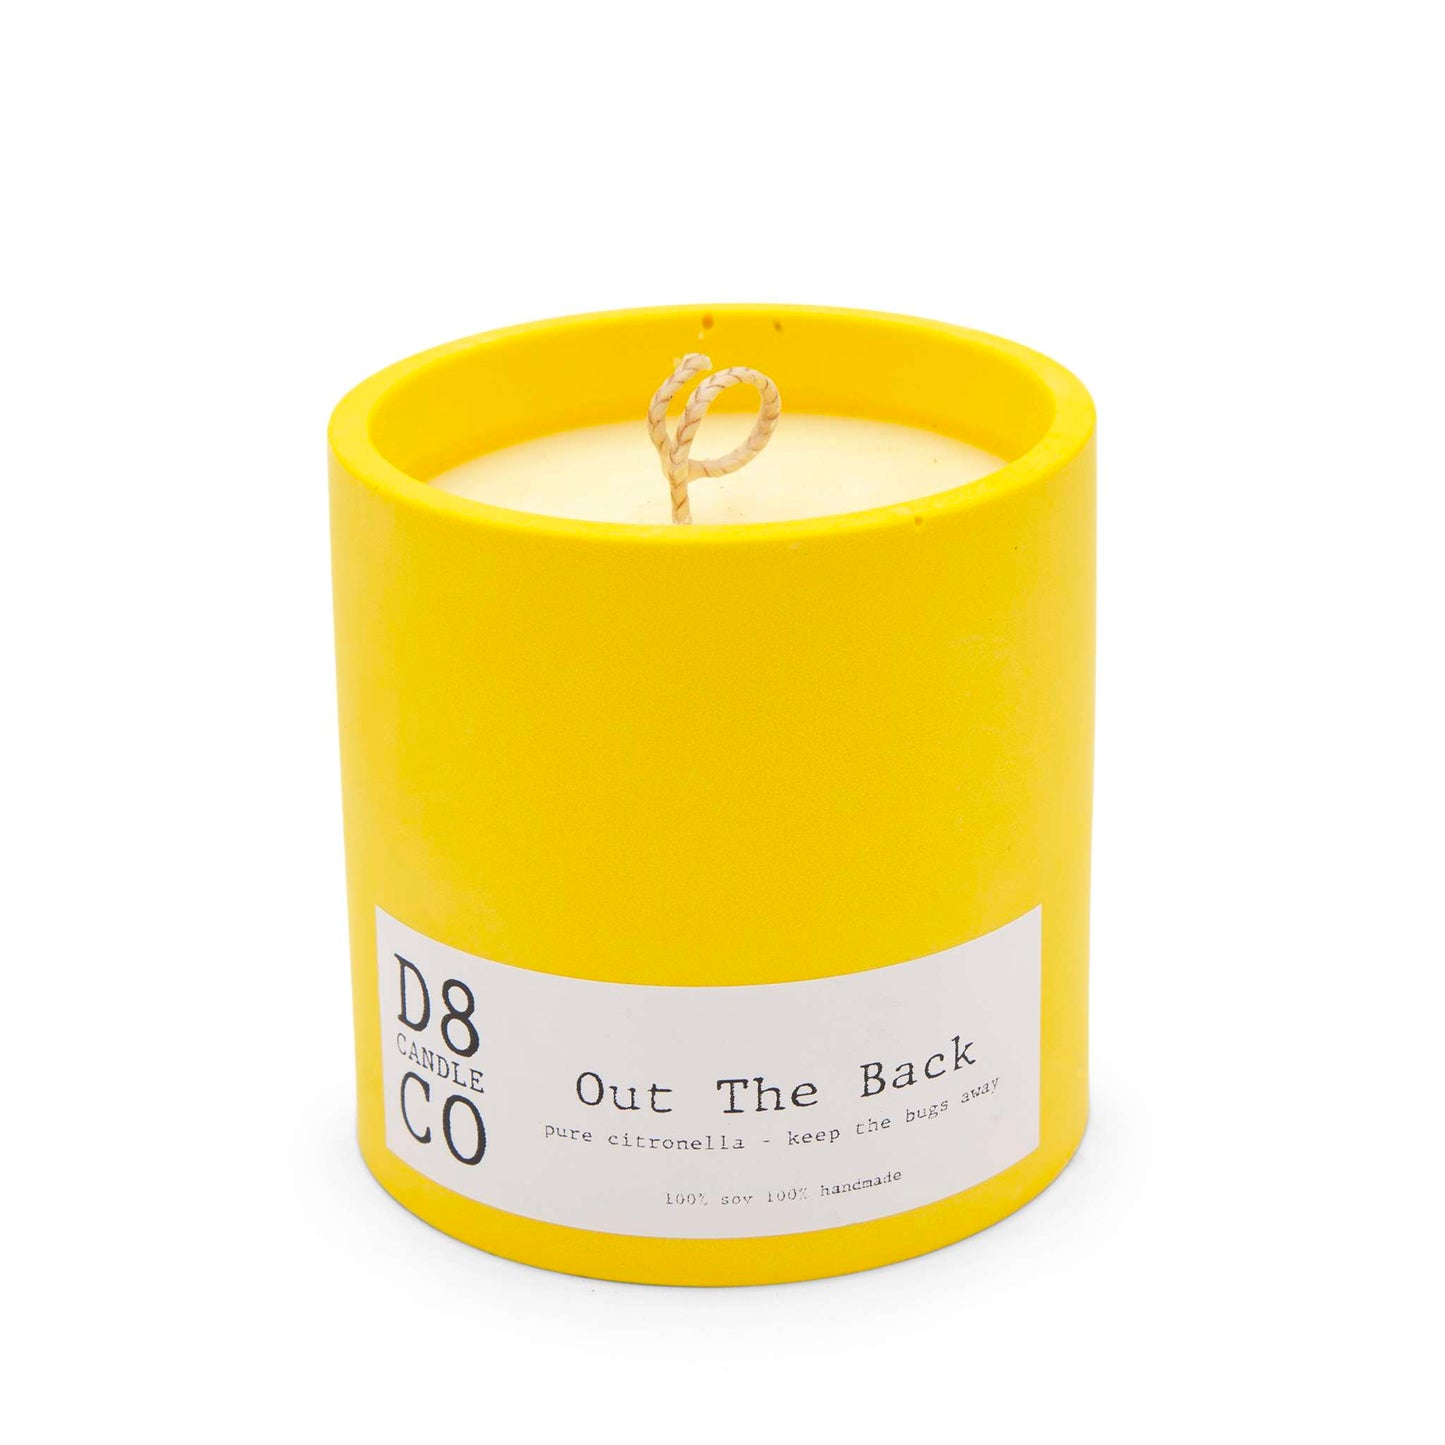 D8 Candle Co. Candles Out the Back Citronella Candle - D8 Candle Co.